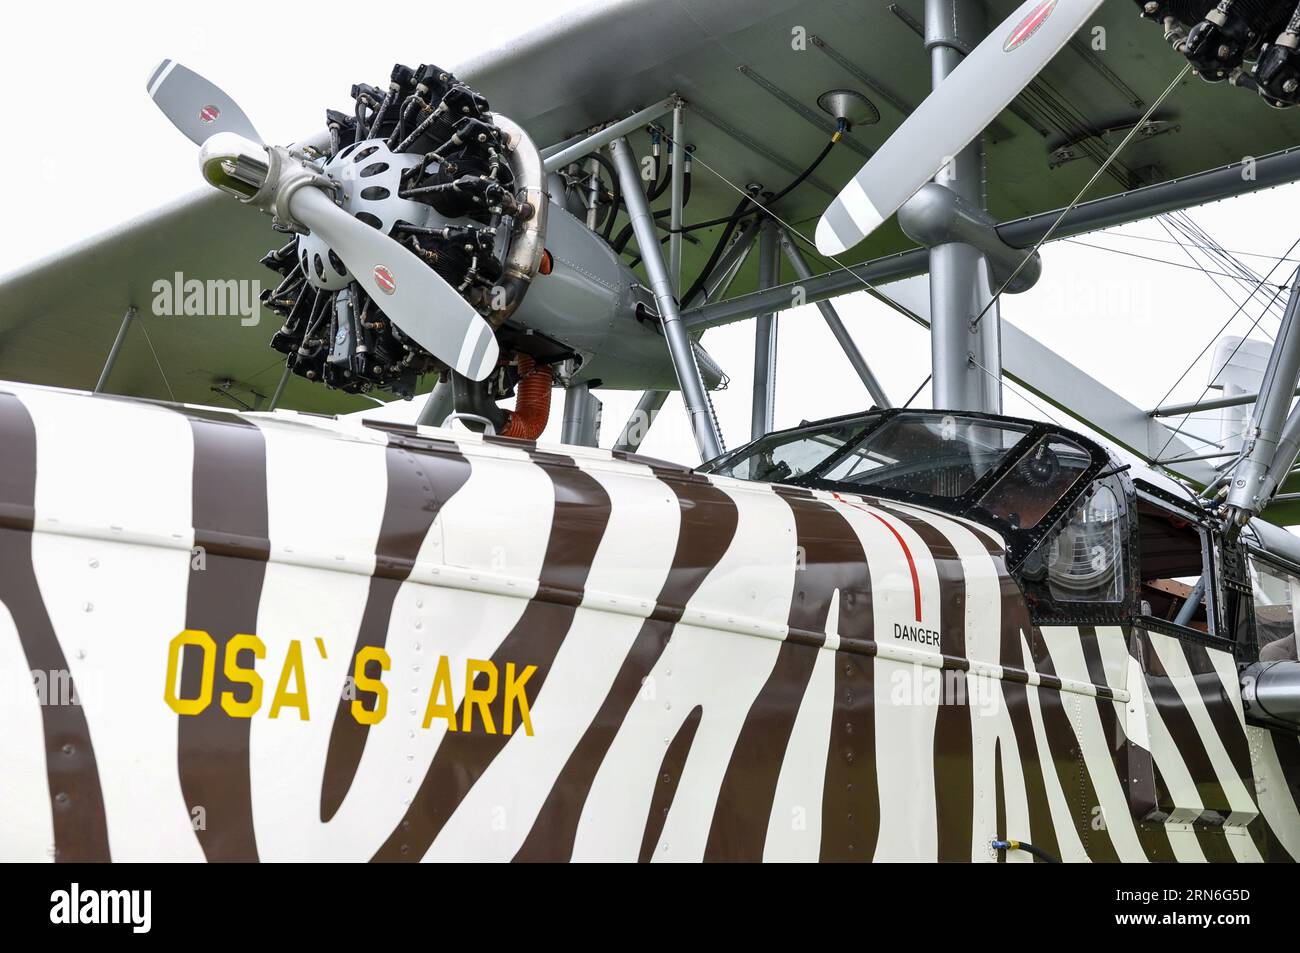 Sikorsky S-38 twin-engined eight-seat sesquiplane amphibious aircraft. Sometimes called 'The Explorer's Air Yacht'. Osa's Ark replica explored Africa Stock Photo